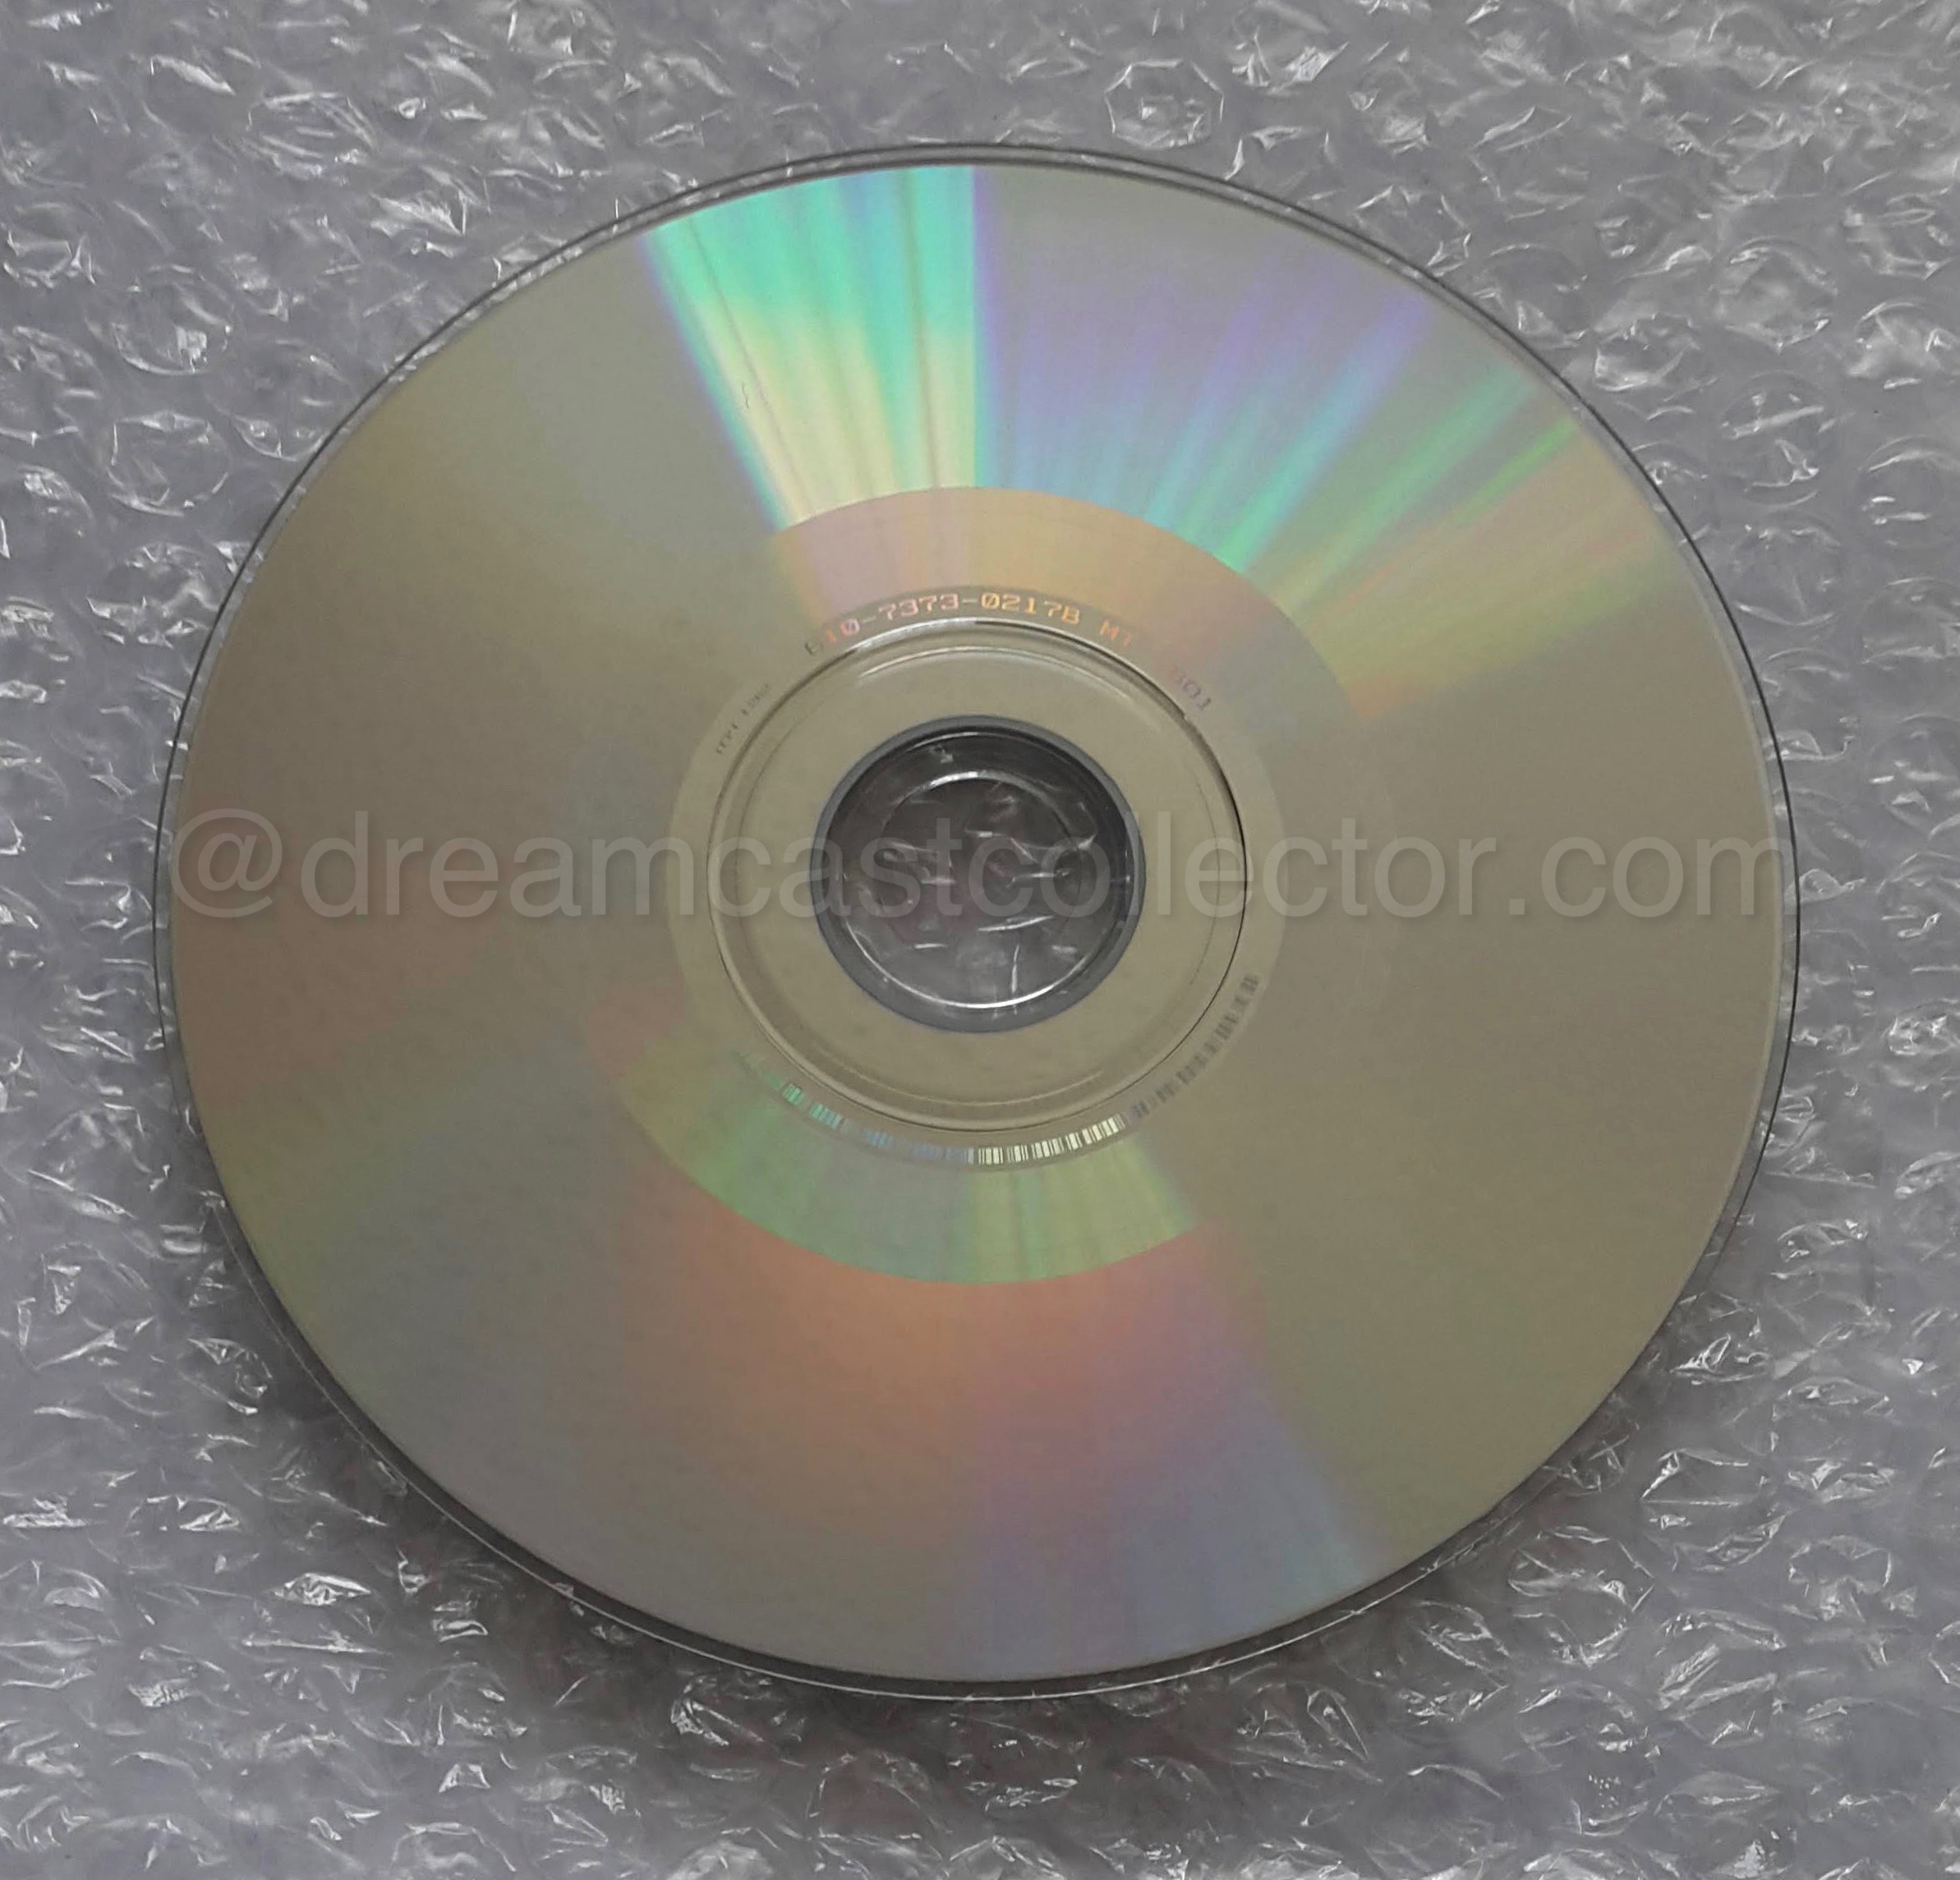 The inner ring is where the pertinent information is found all the NTSC J PAL utility discs adhere to the same layout of a barcode, IFPI SID mastering code & full catalogue designation. An IFPI Mould code is generally found pressed or scratched in the disc's plastic ring.